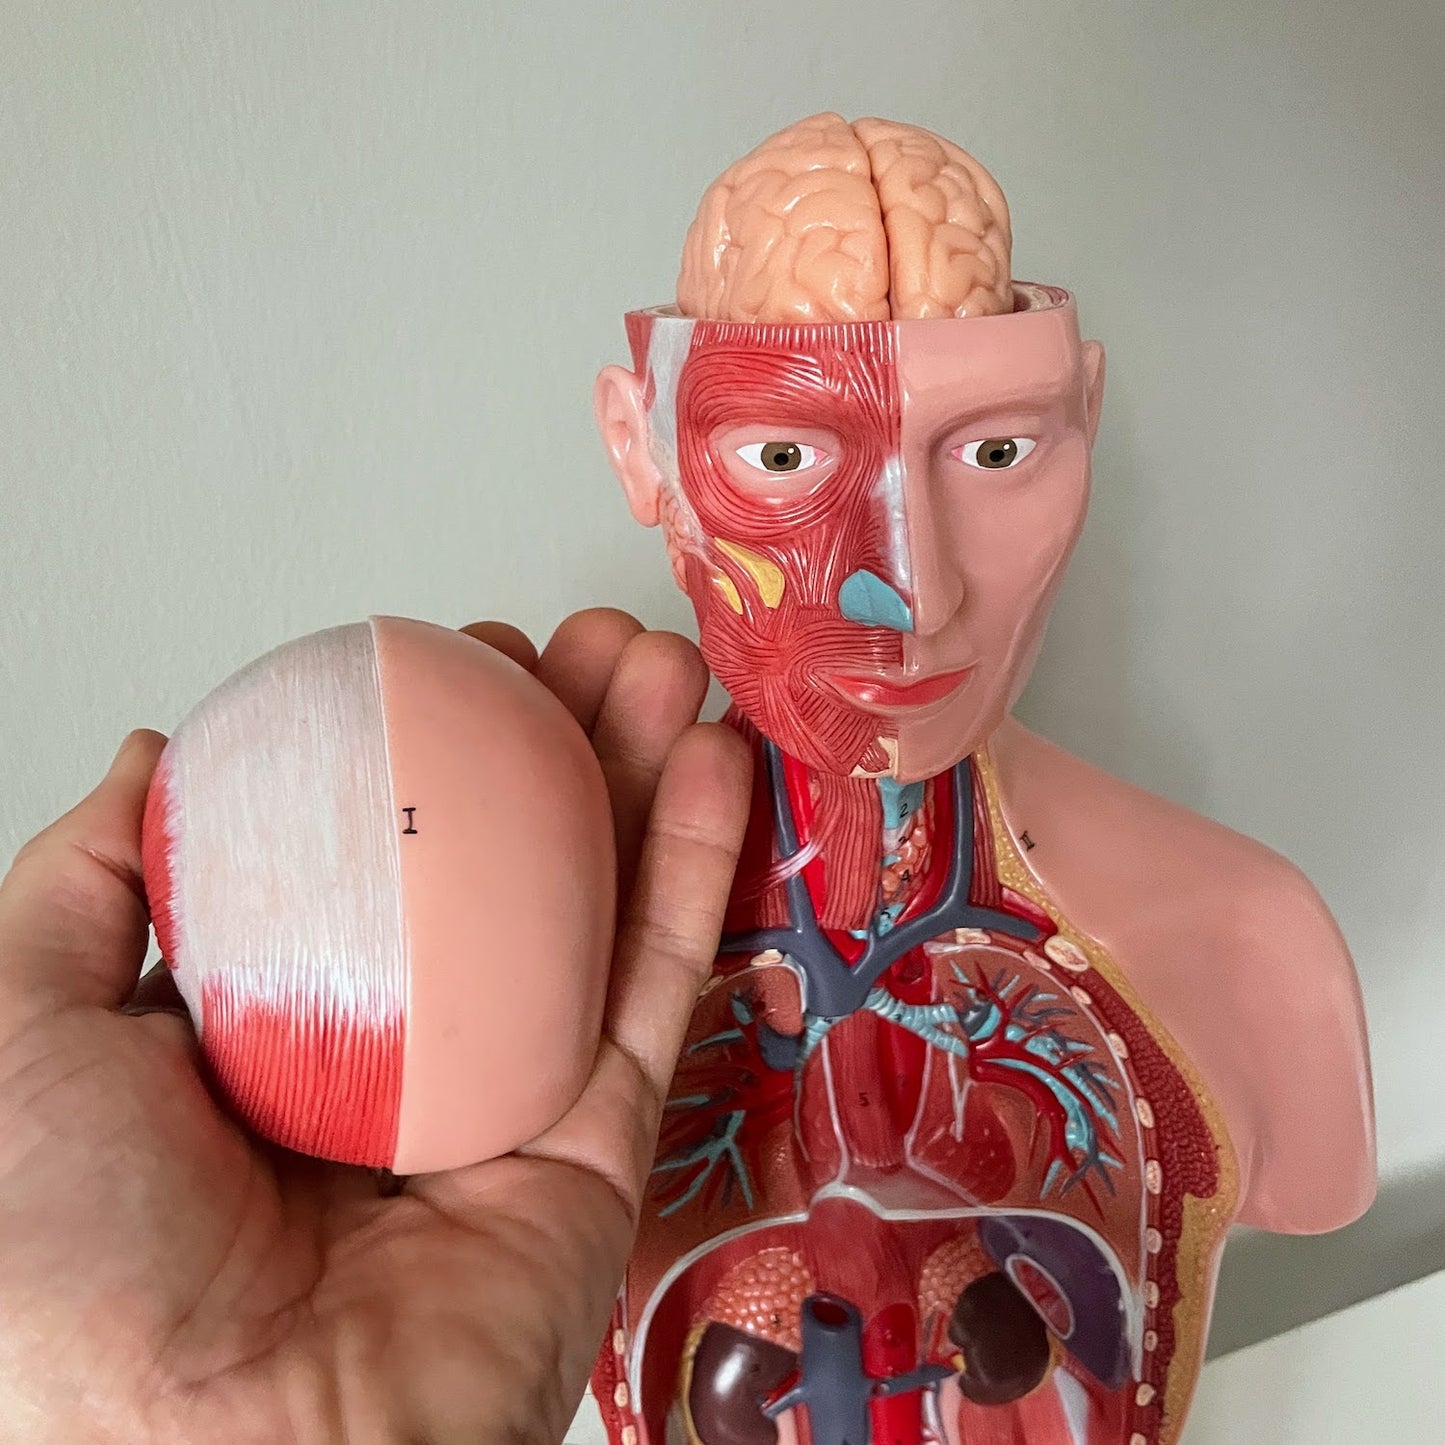 Anatomy model with musculature, both sexes and removable organs